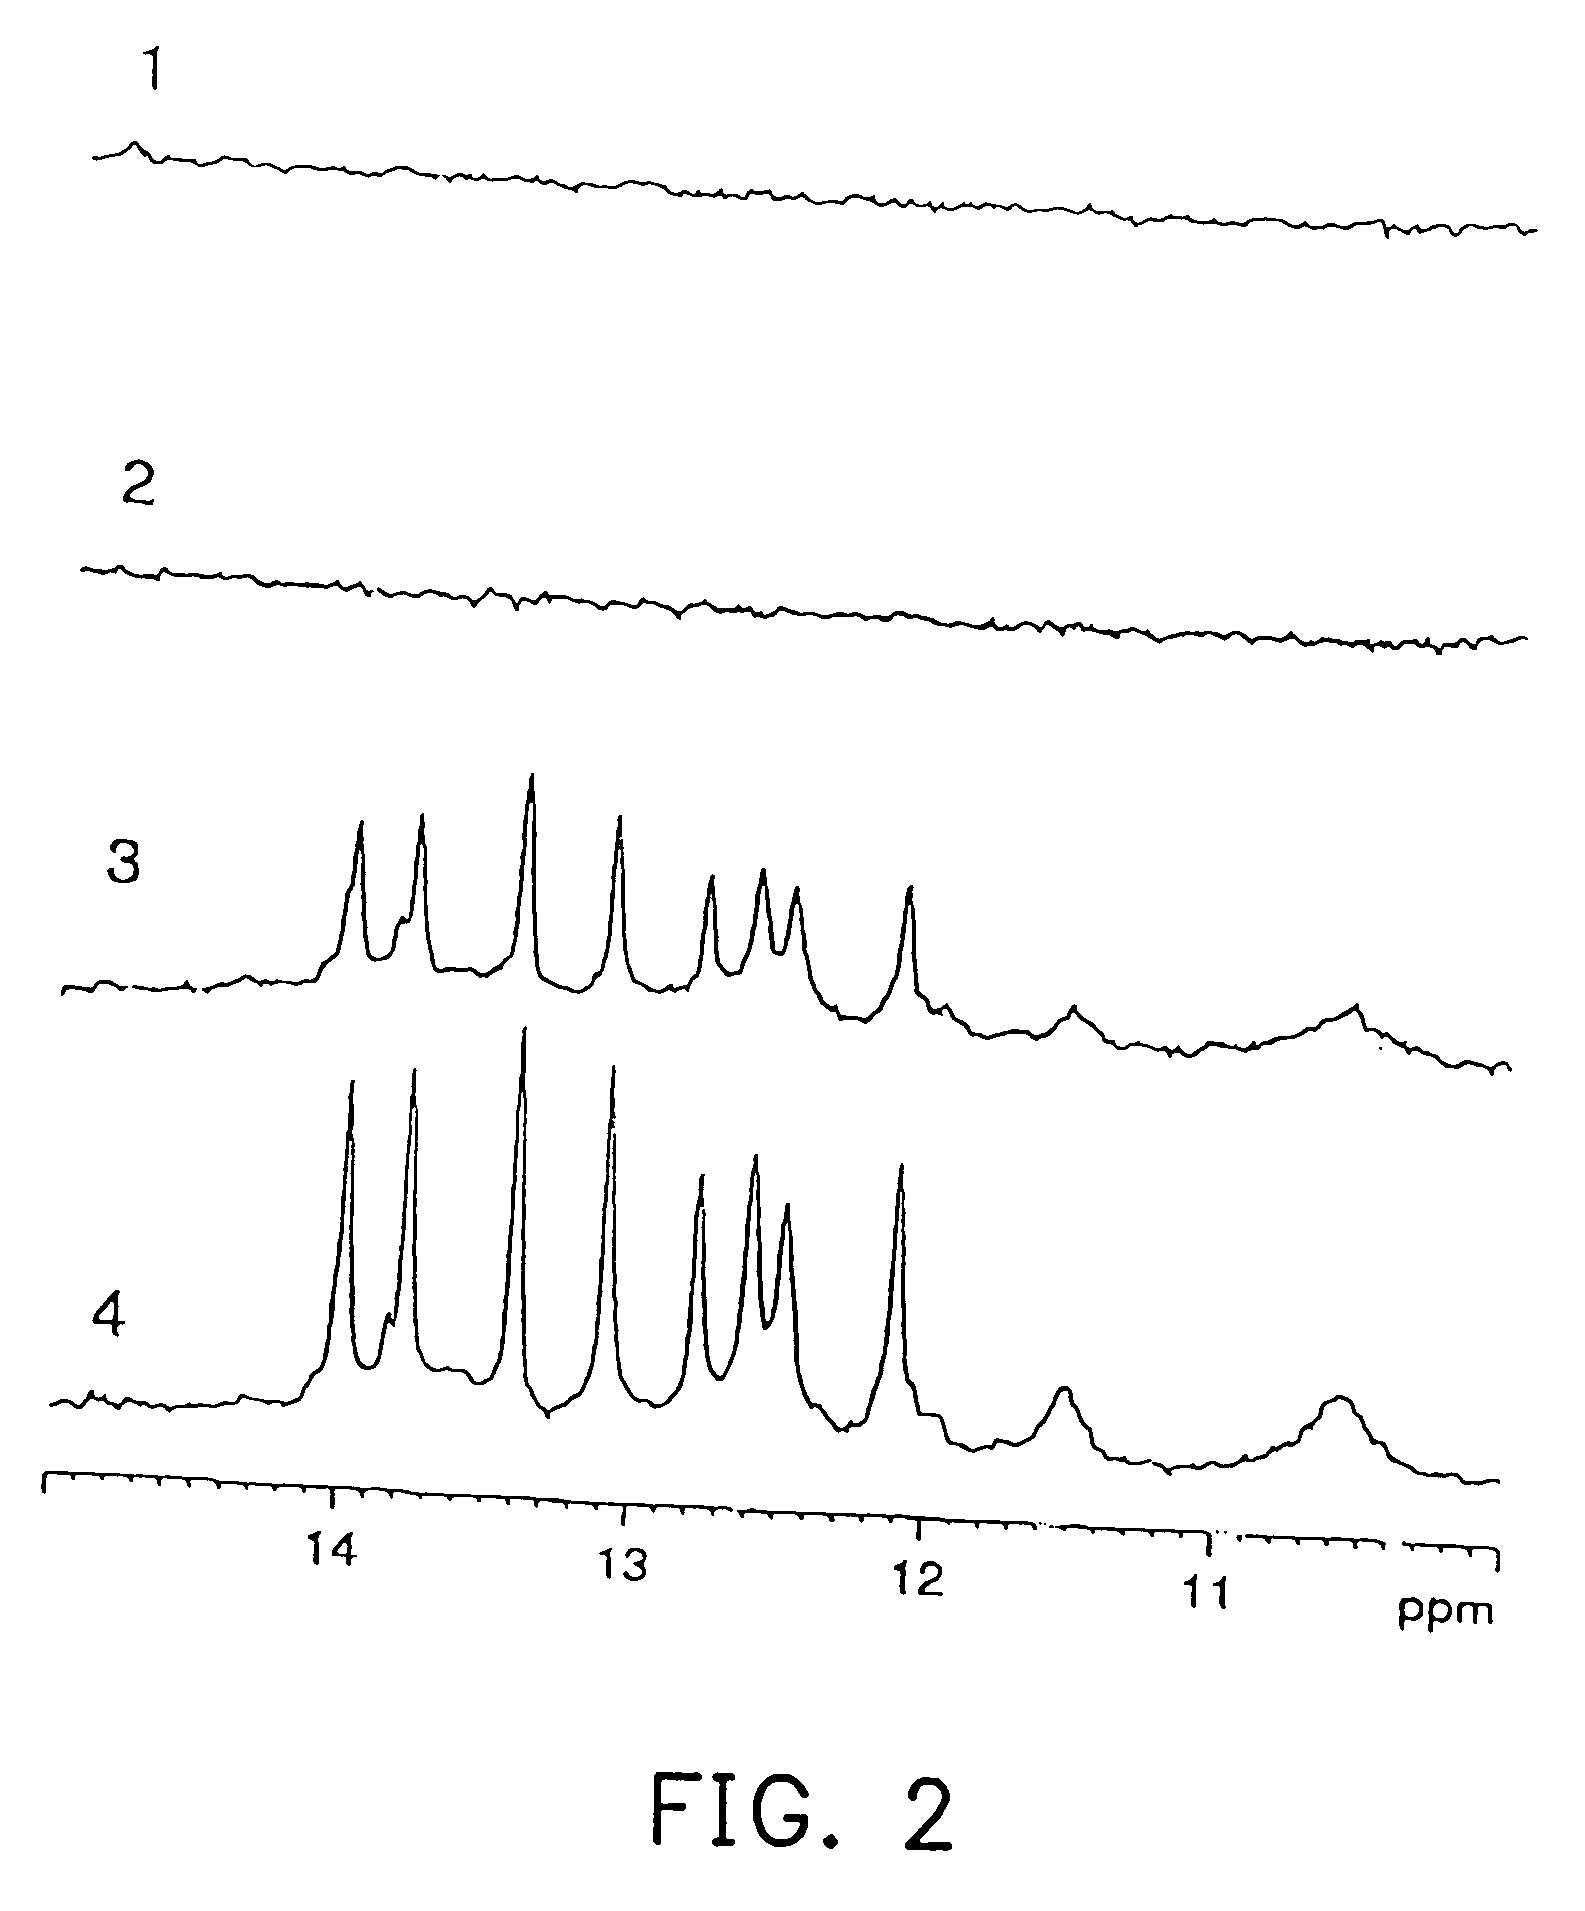 Oligonucleotides labeled with stable isotopes and a method for detecting the same